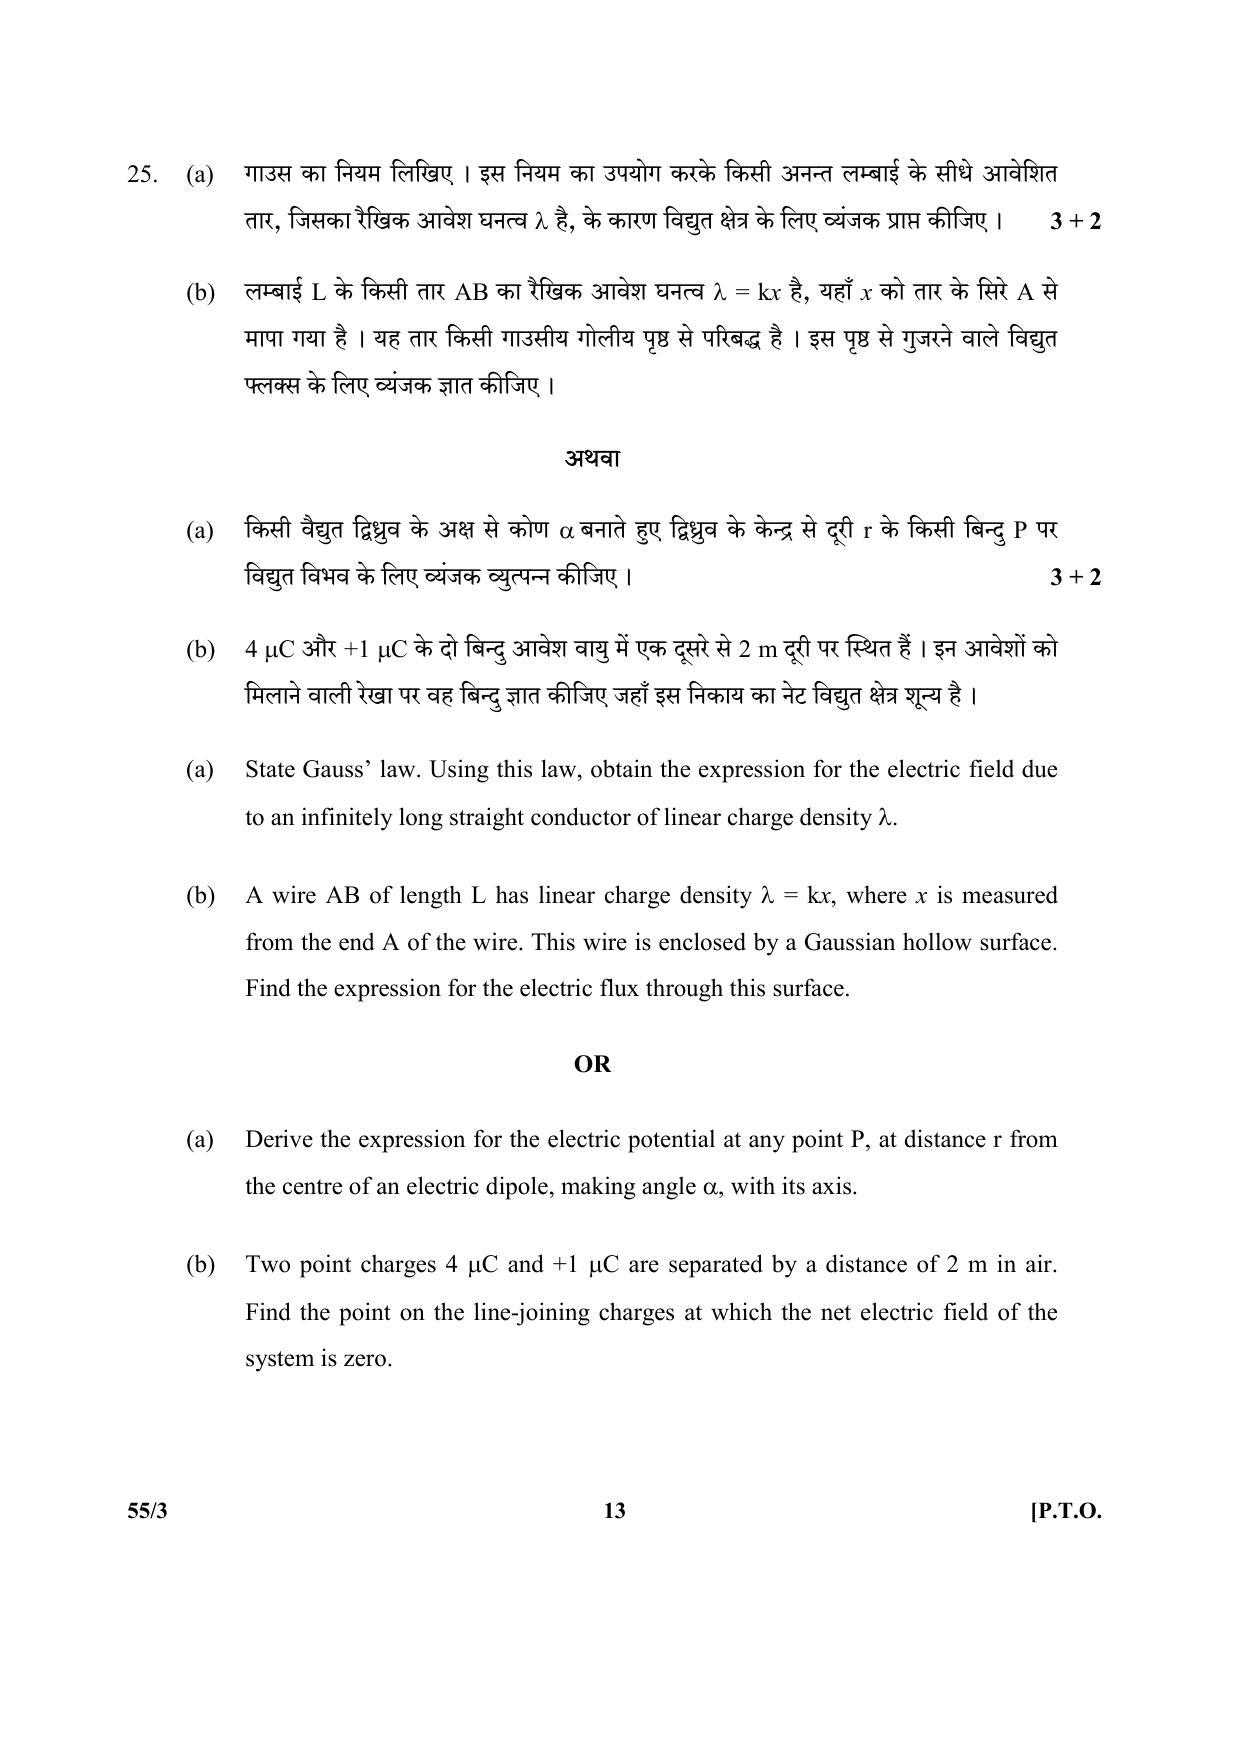 CBSE Class 12 55-3 (Physics) 2017-comptt Question Paper - Page 13